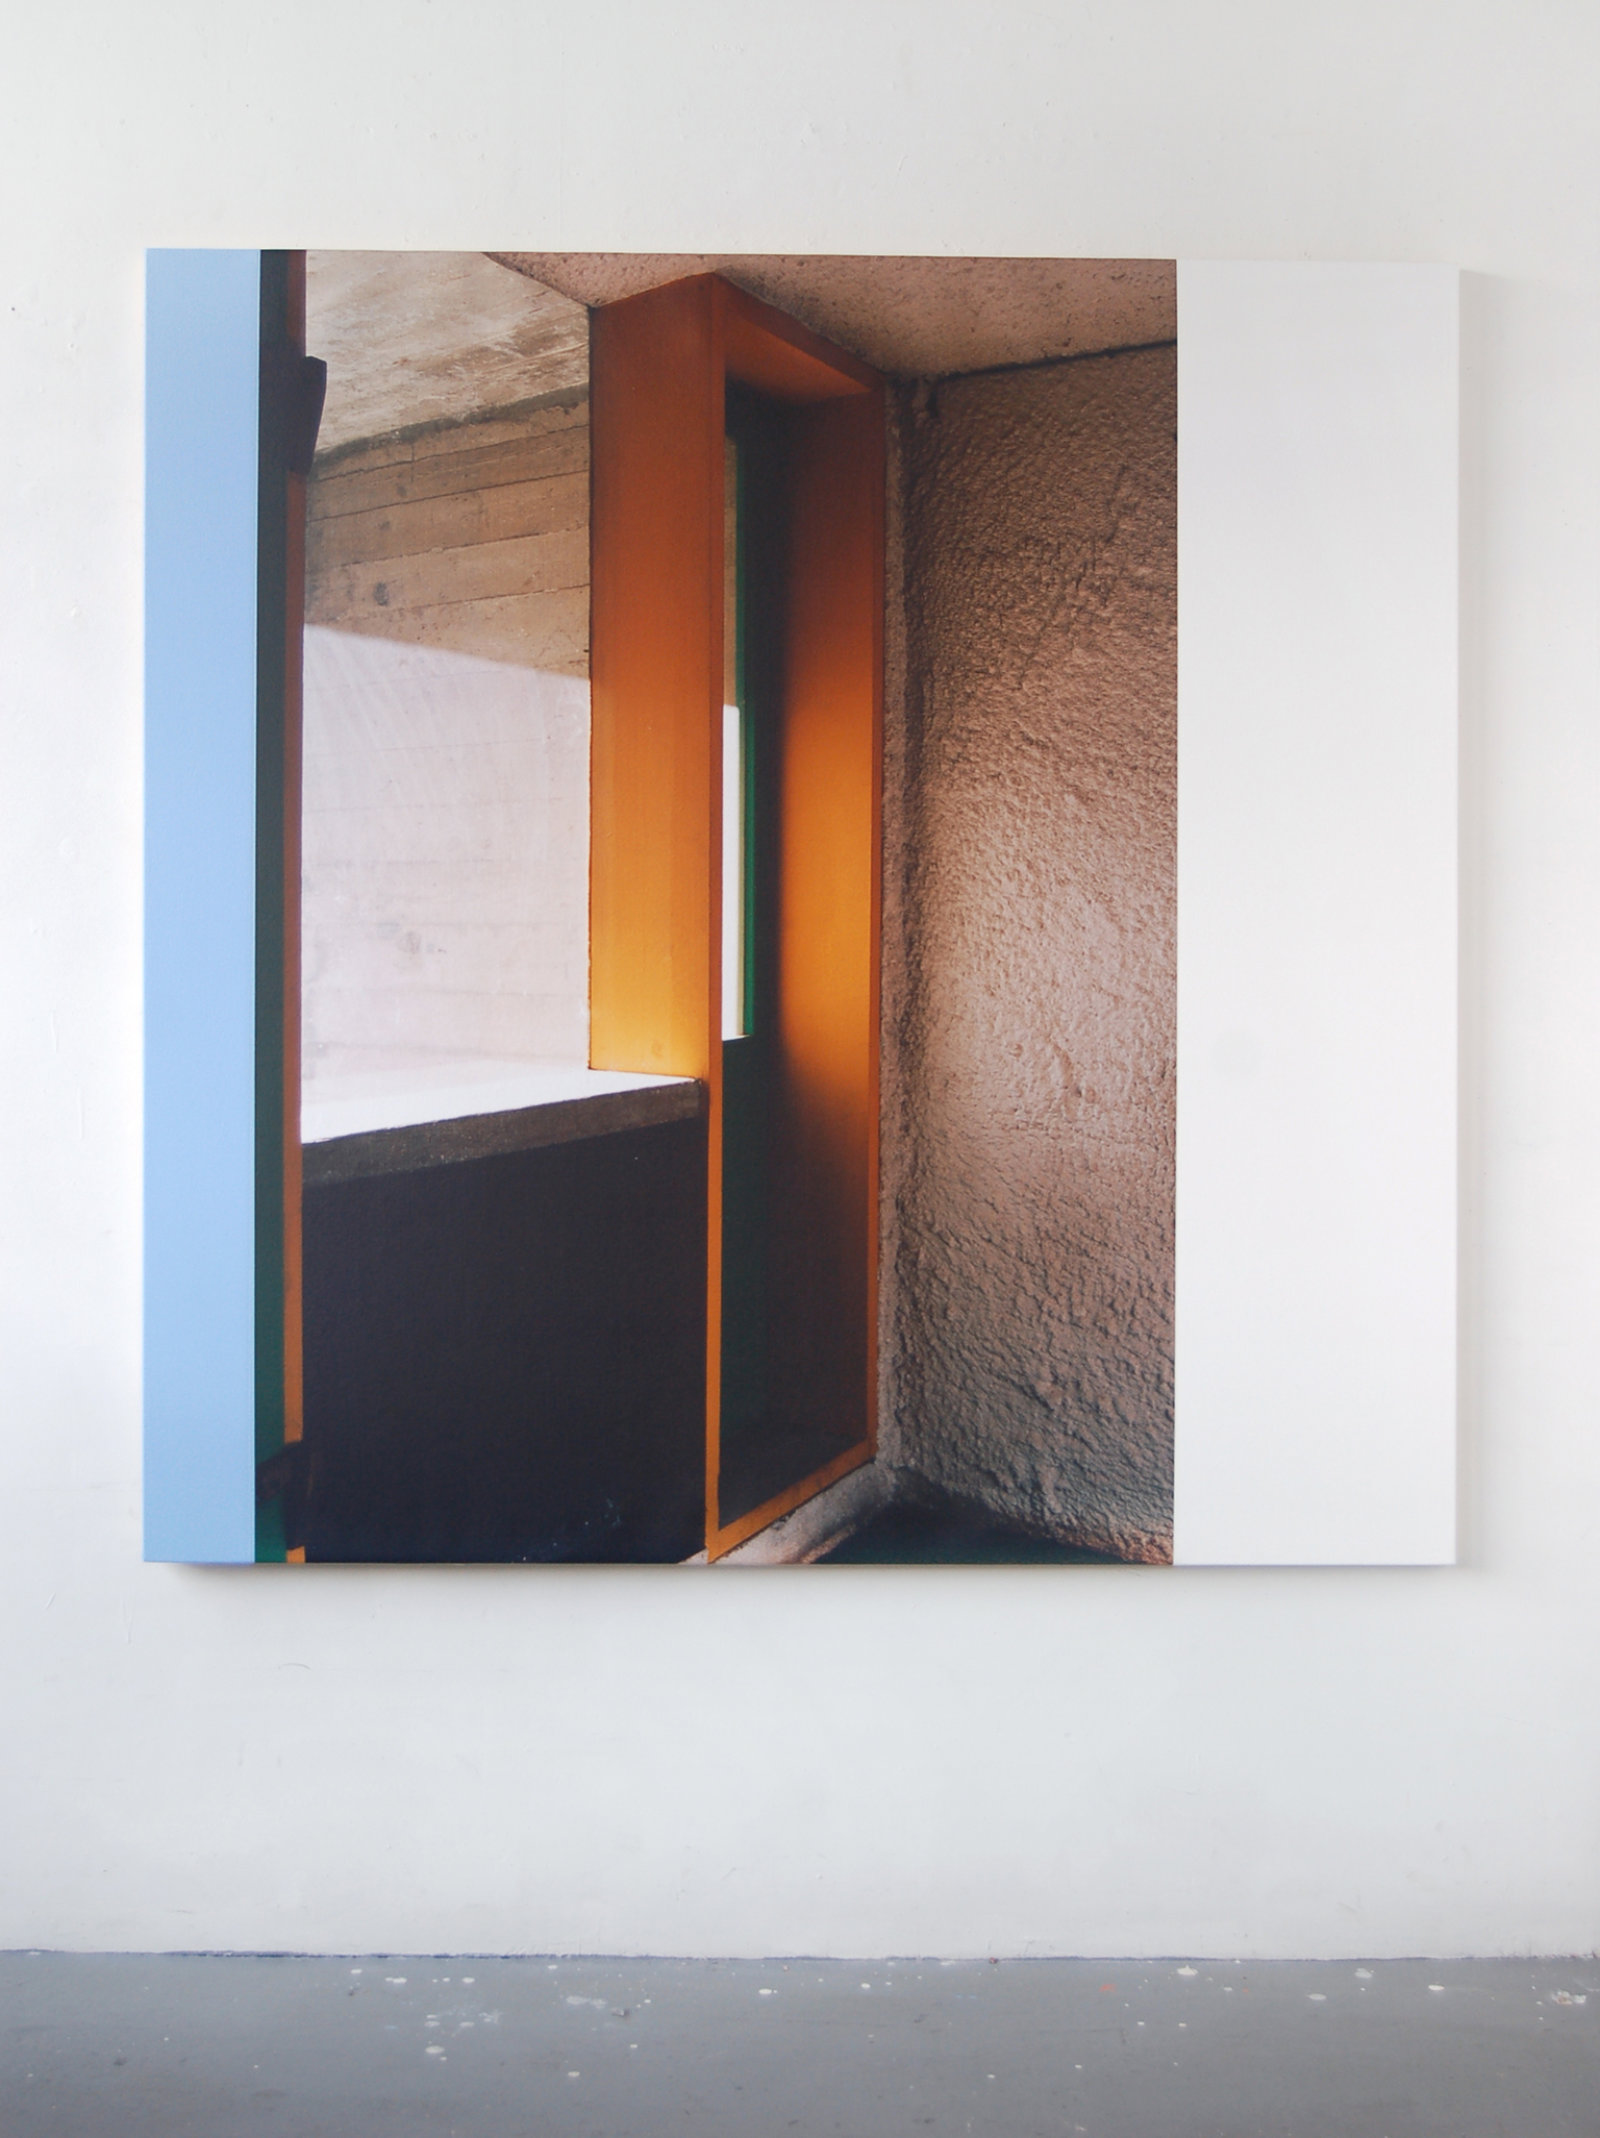 Ian Wallace, La Tourette (A Space for Waiting), 2006, photolaminate and acrylic on canvas, 60 x 60 in. (152 x 152 cm)